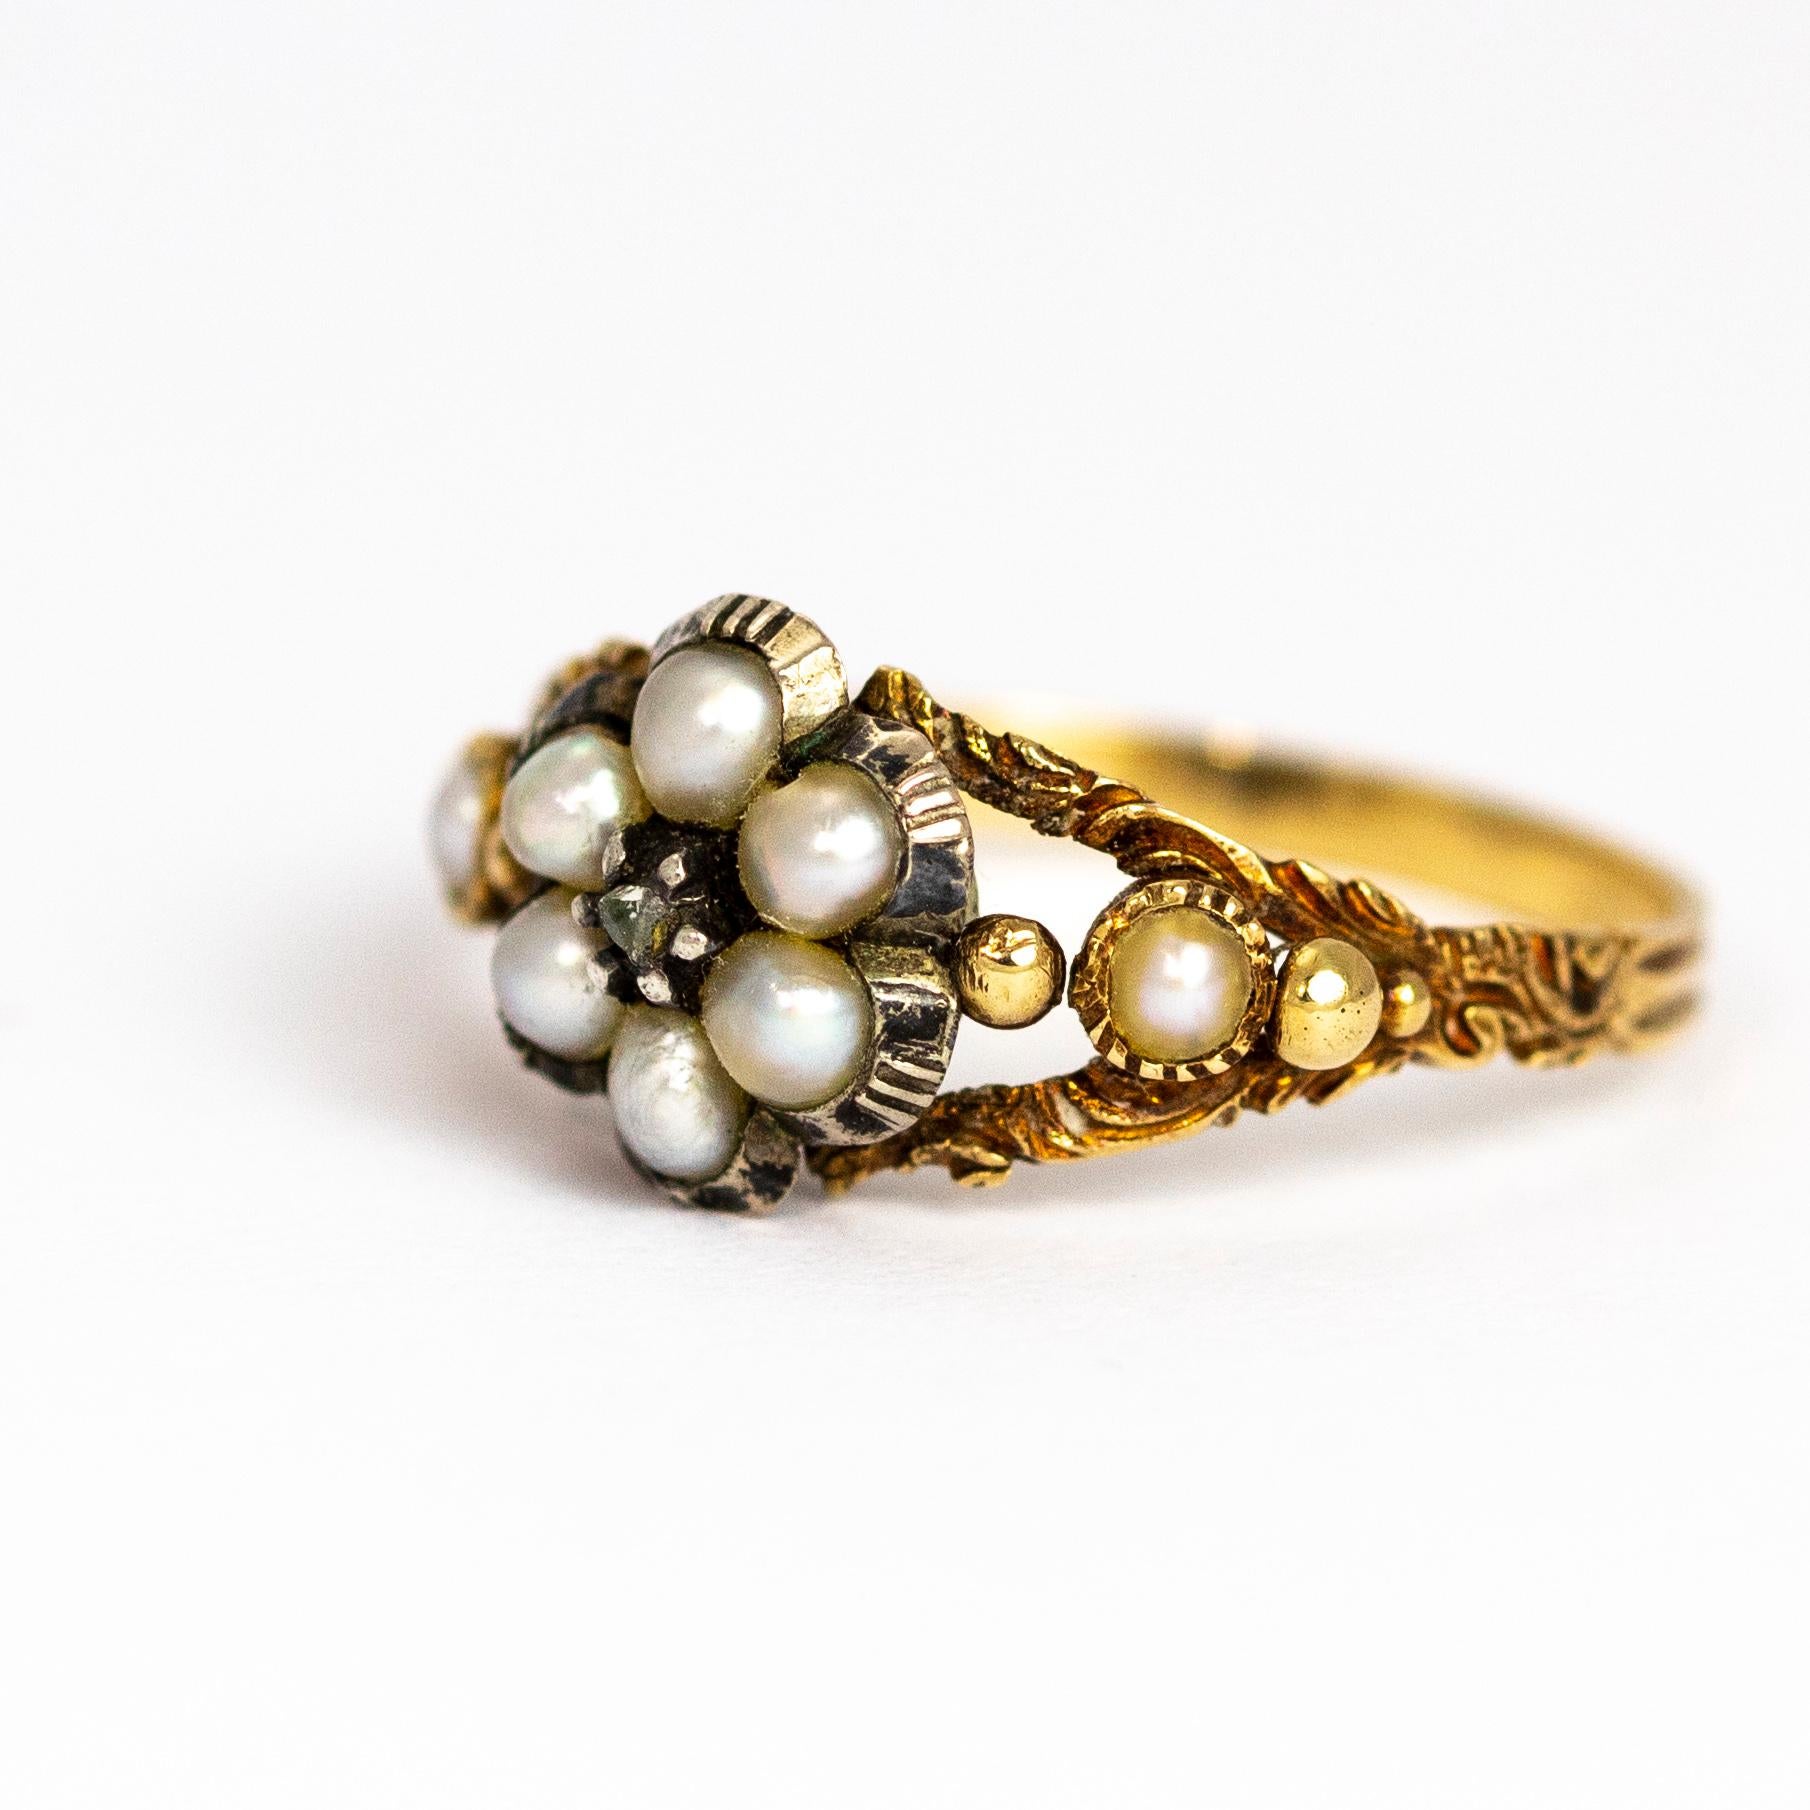 This late Georgian ring holds a rose cut diamond at the centre of the cluster and is surrounded by six pearls. The shoulders of the ring feature a pearl on each and these are also beautifully engraved. Behind the cluster detail is a sweet glazed